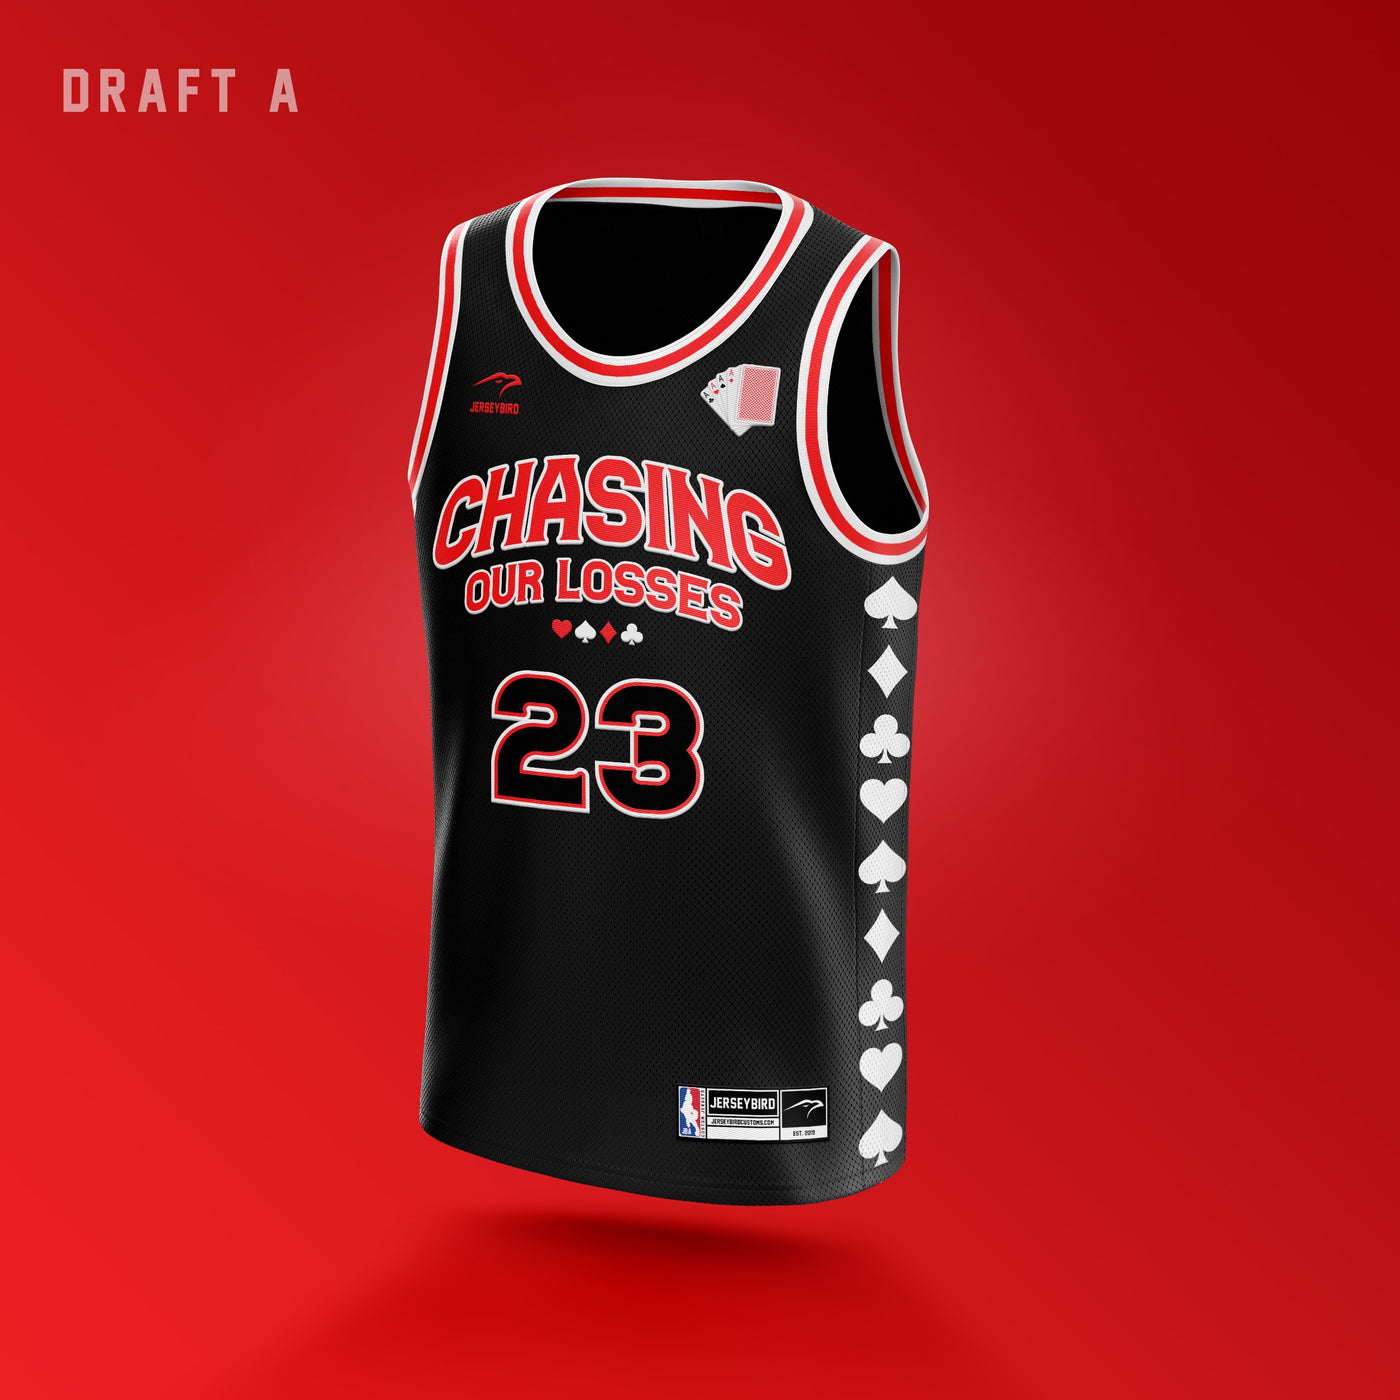 Chasing Our Losses Sublimated Basketball Jerseys Bulk Order (8 Units)